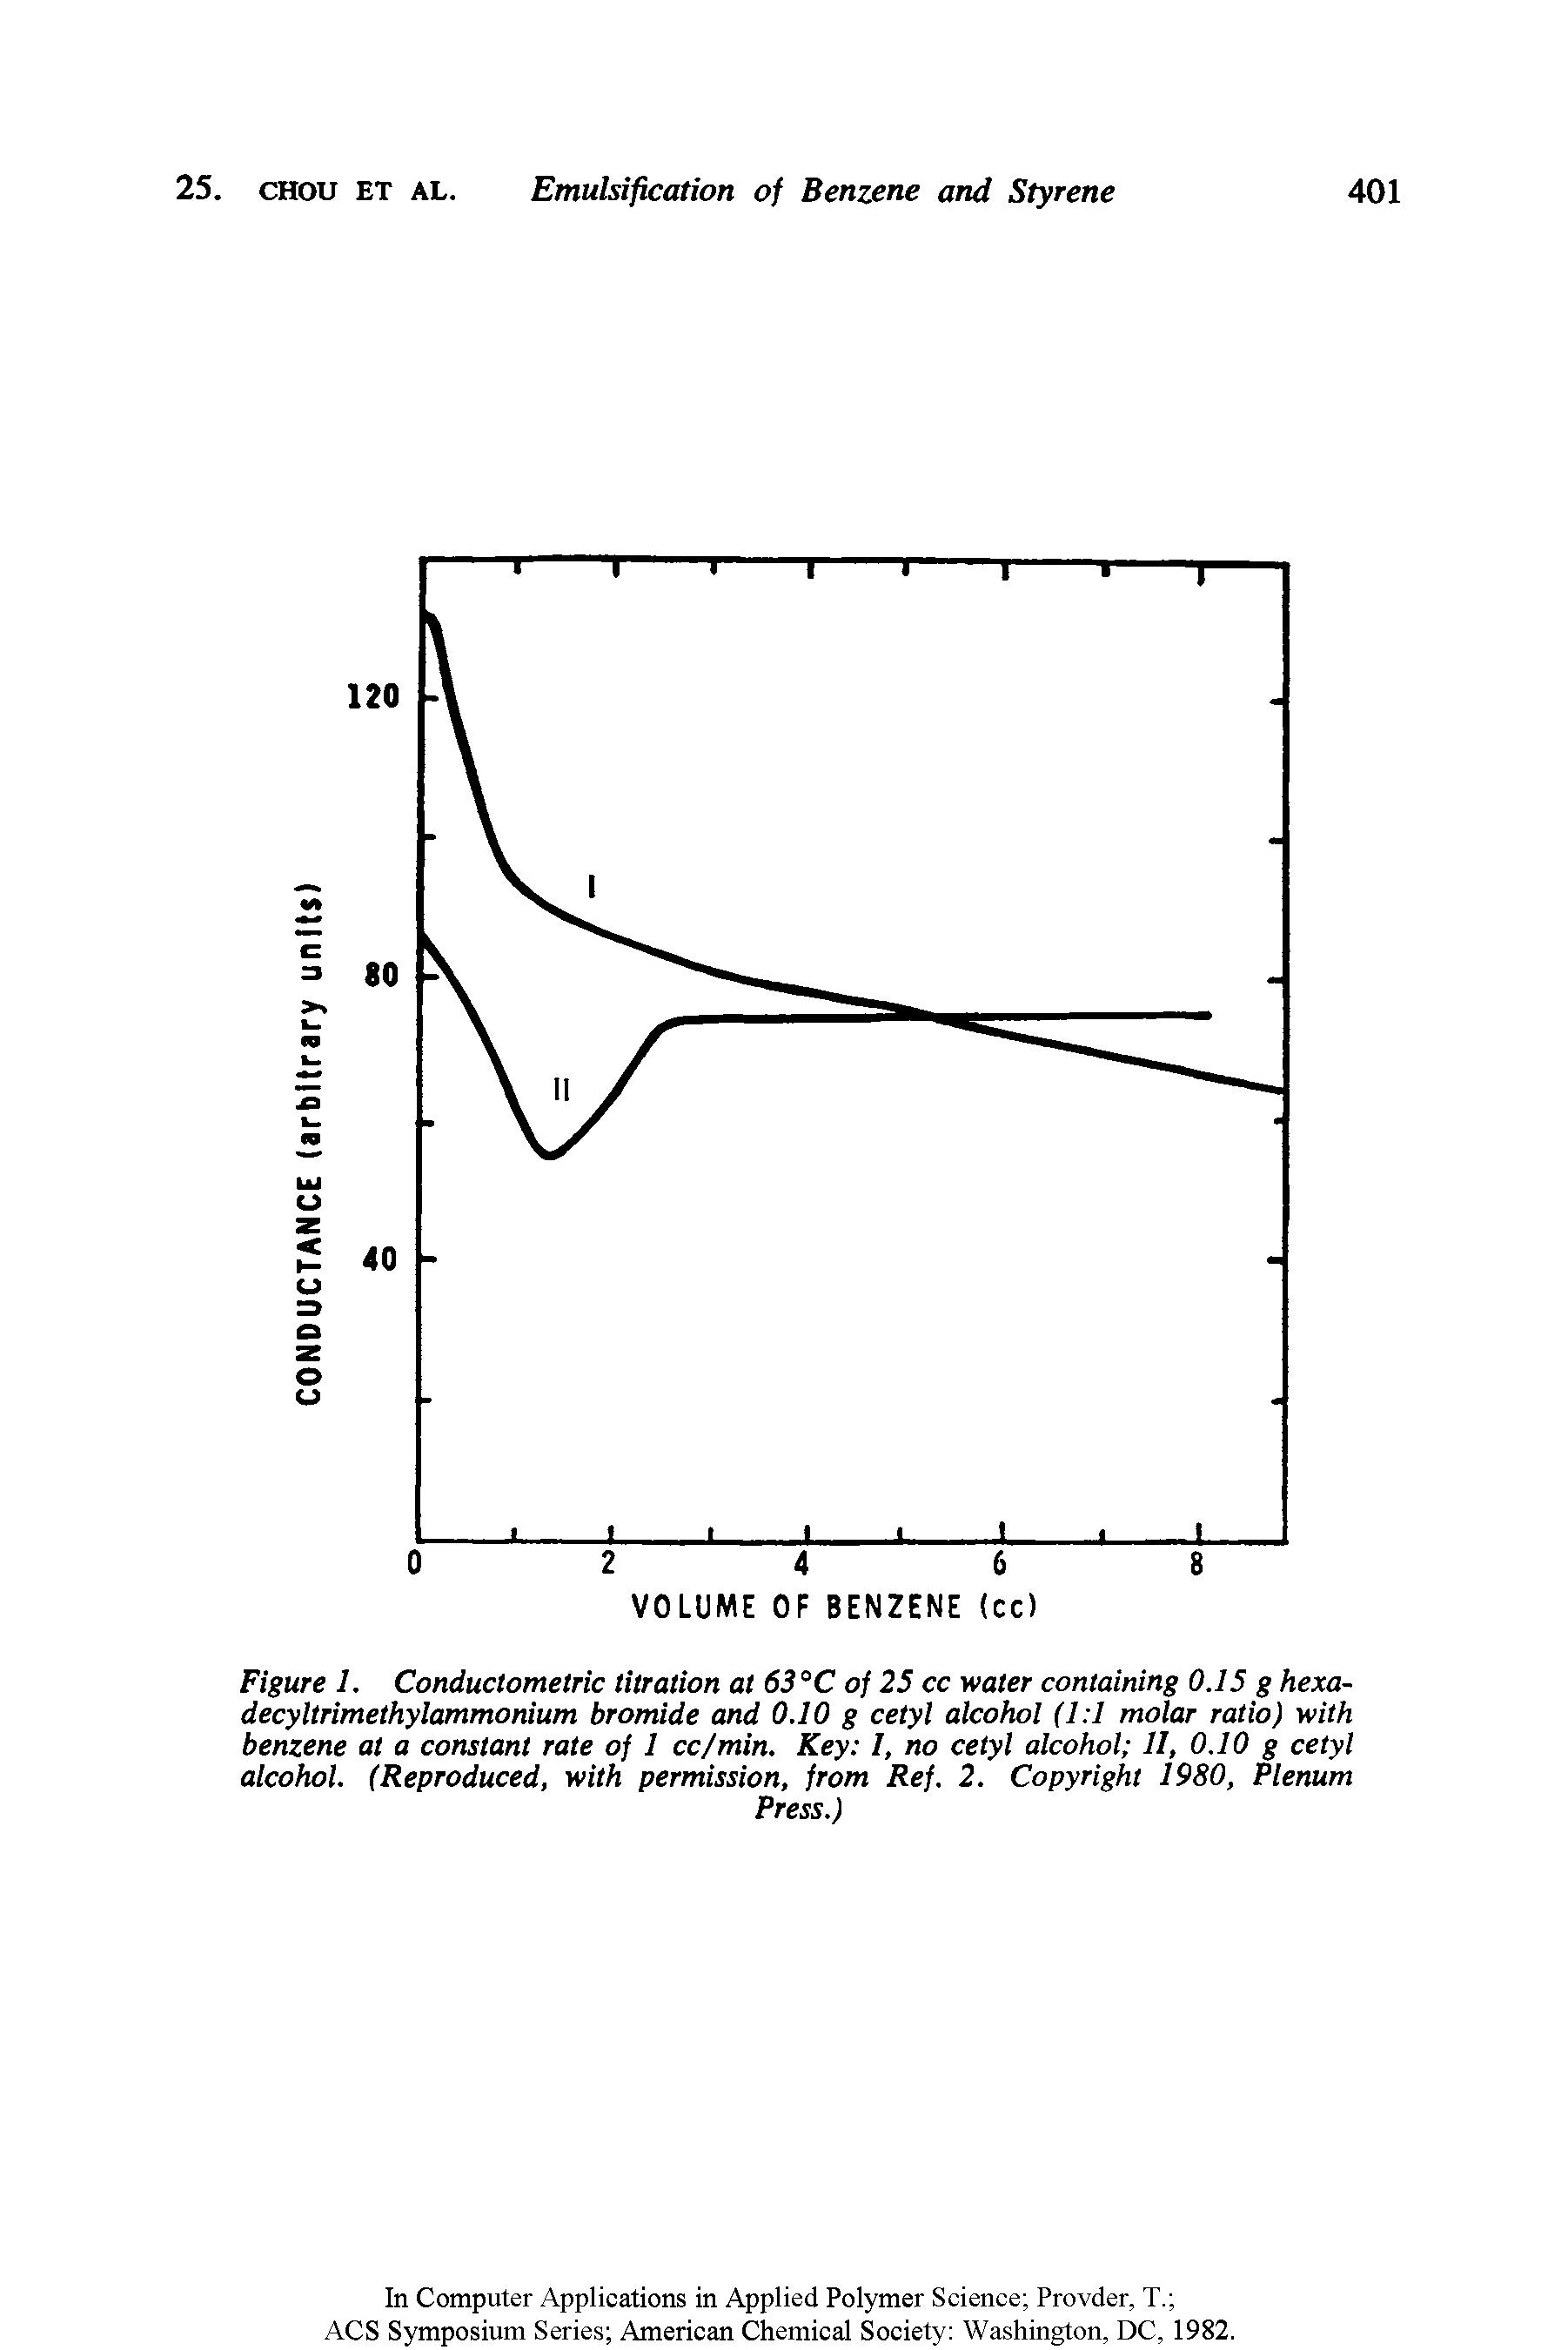 Figure 1. Conductometric titration at 63°C of 25 cc water containing 0.15 g hexa-decyltrimethylammonium bromide and 0.10 g cetyl alcohol (1 1 molar ratio) with benzene at a constant rate of 1 cc/min. Key 1, no cetyl alcohol 11, 0.10 g cetyl alcohol. (Reproduced, with permission, from Ref. 2. Copyright 1980, Plenum...